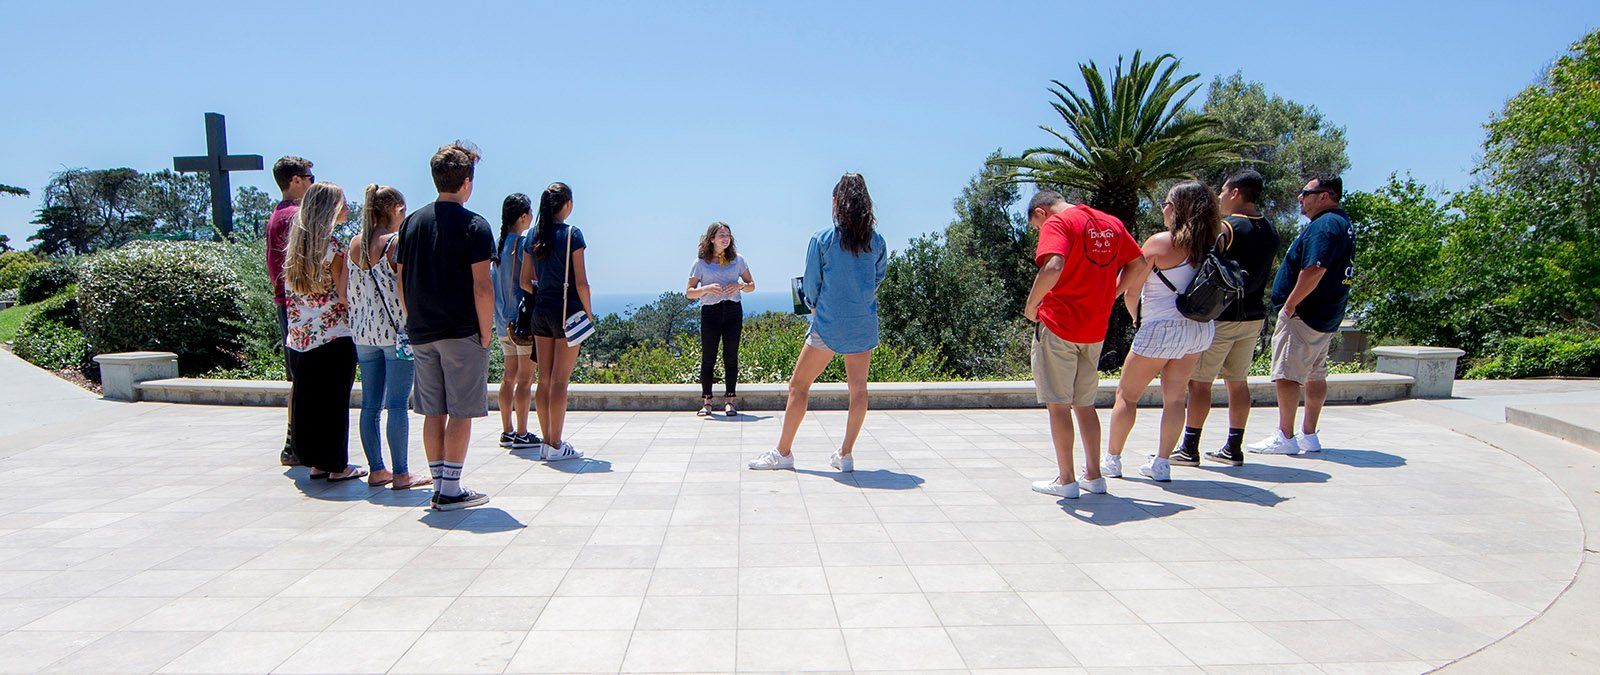 A PLNU student speaks in front of the campus cross to a group on a campus tour.